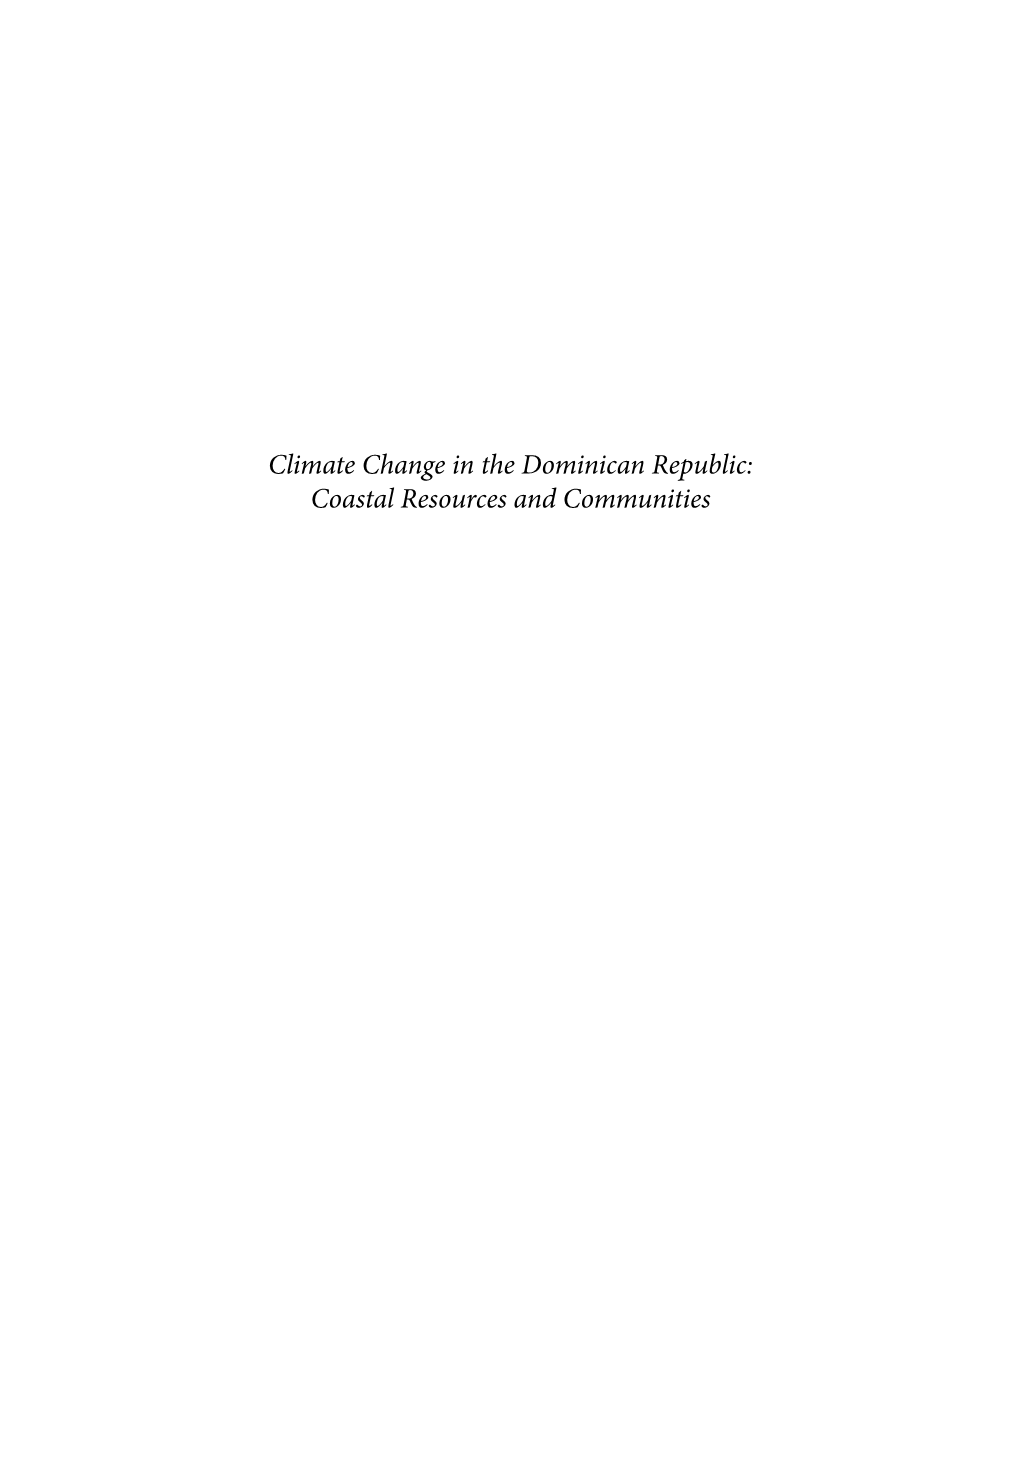 Climate Change in the Dominican Republic: Coastal Resources and Communities